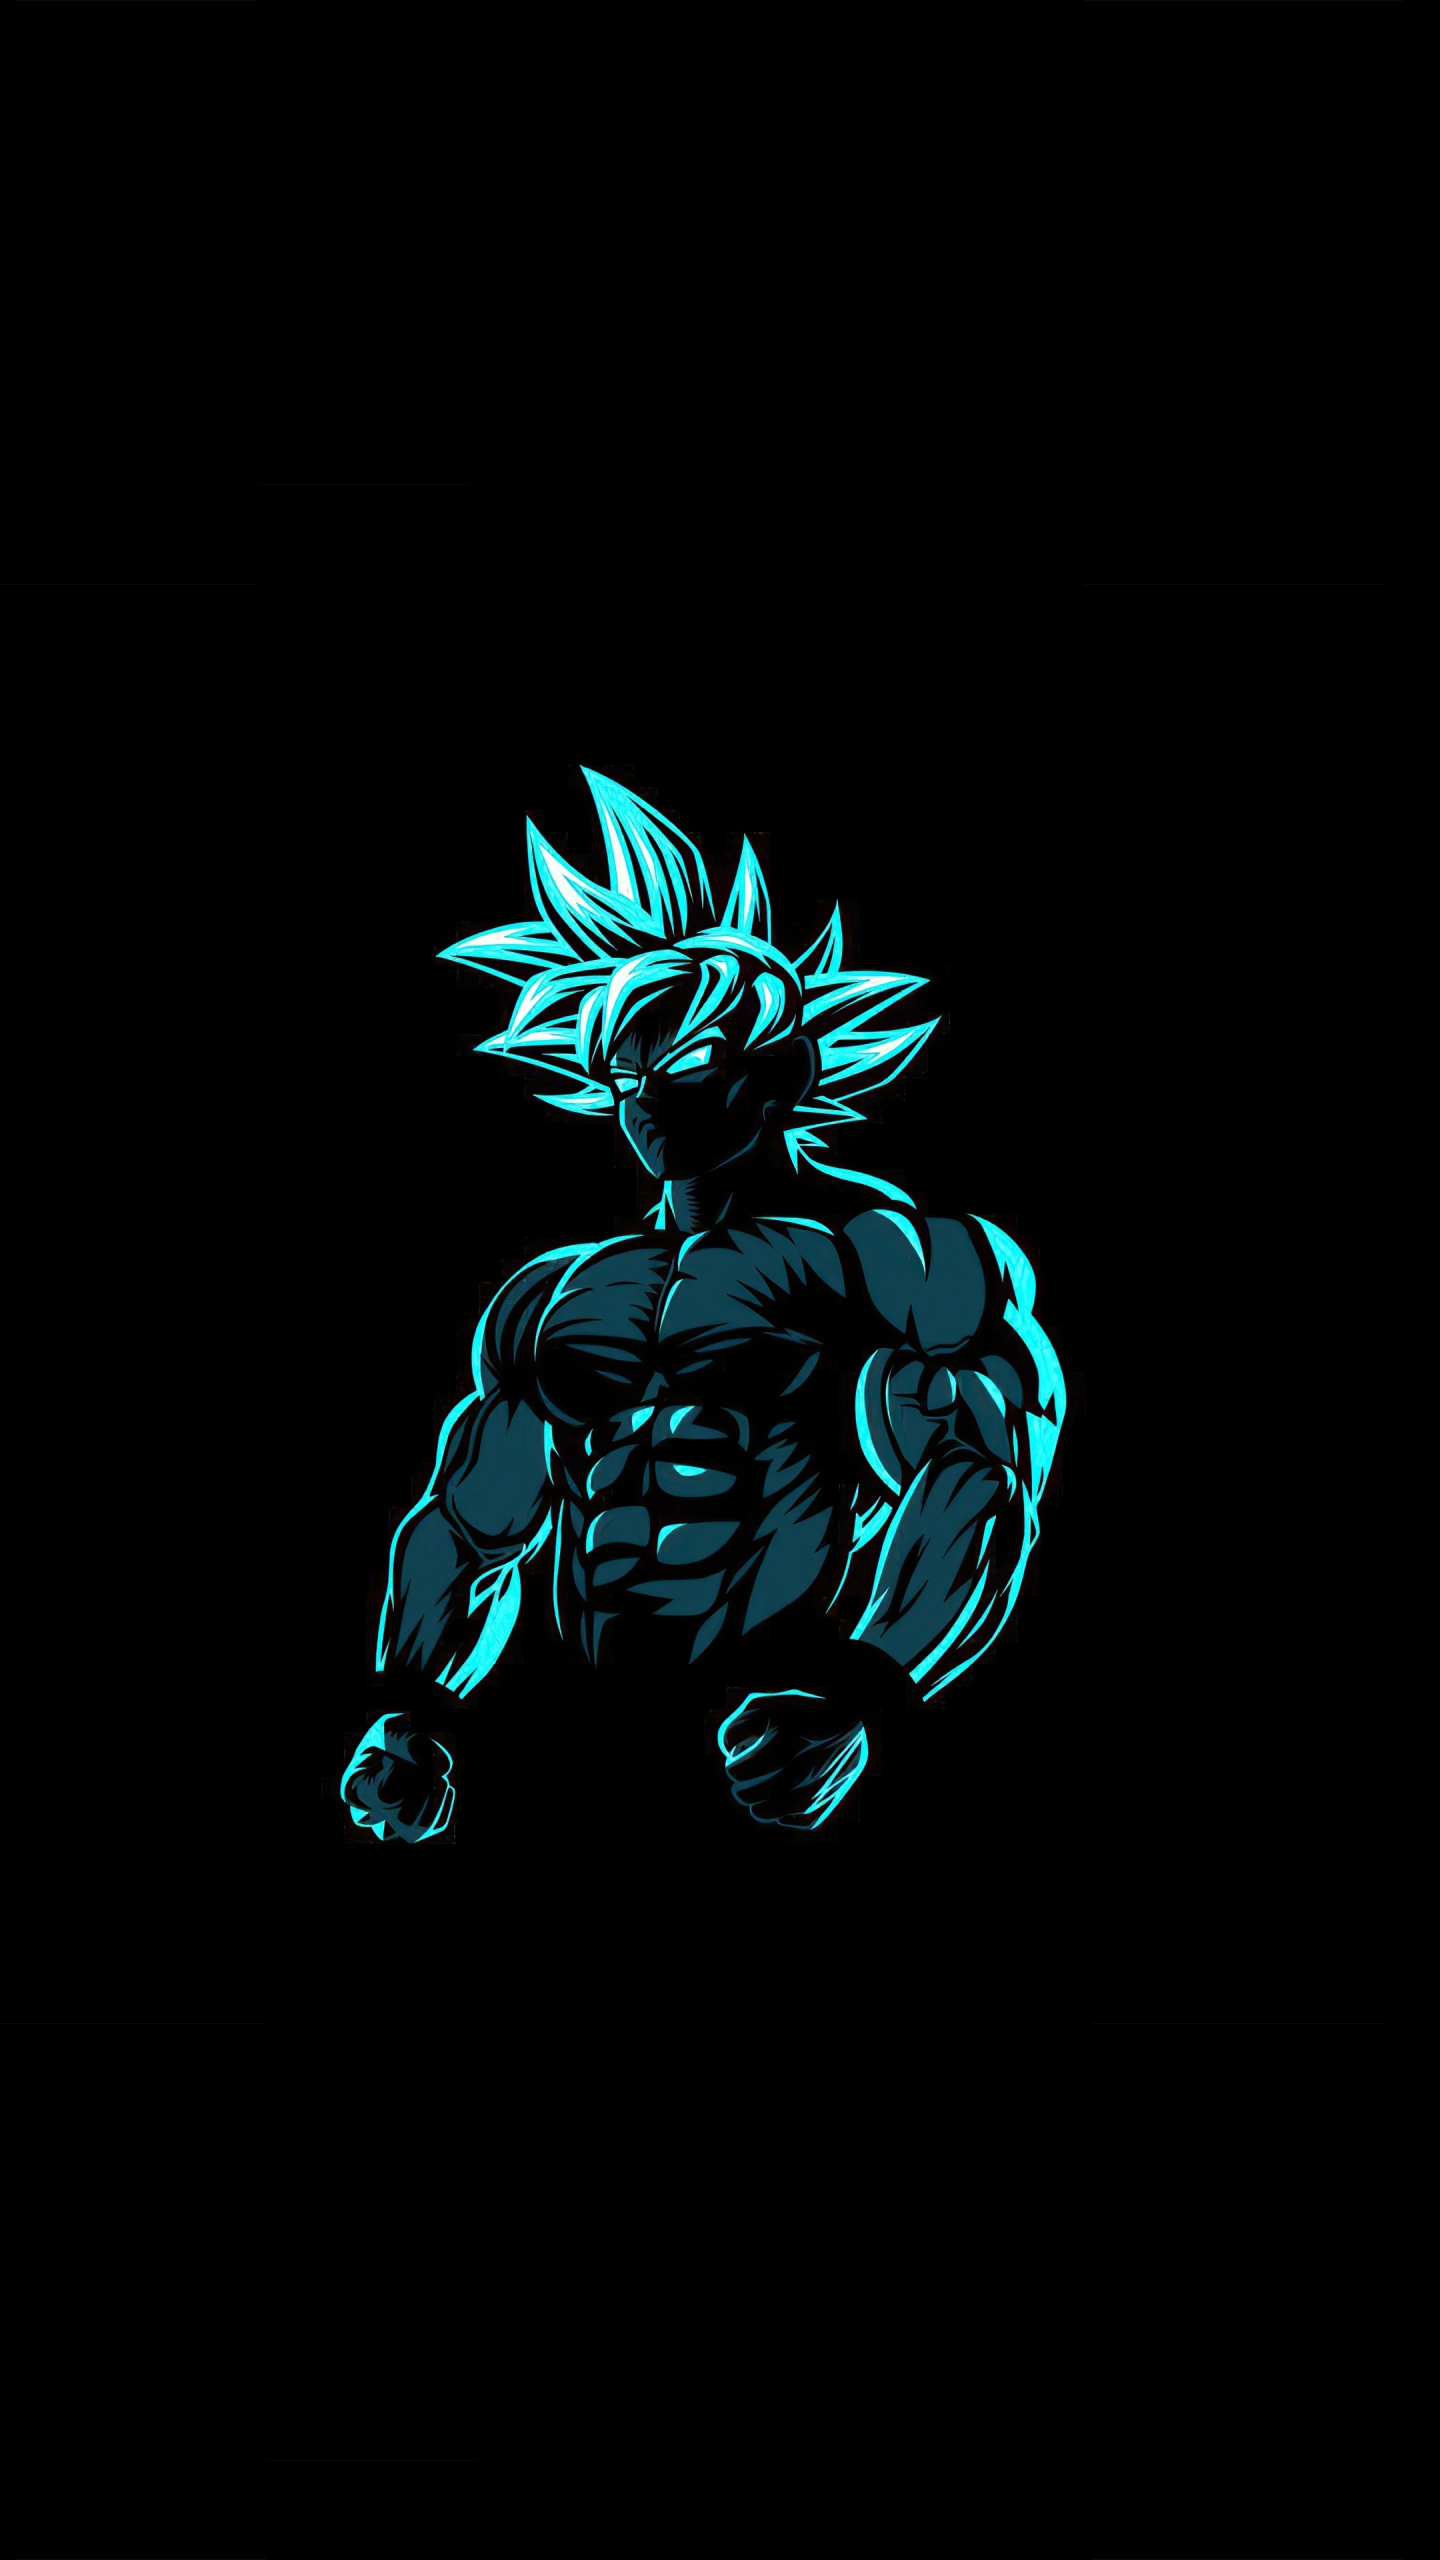 800x1280 Dragon Ball Super Saiyan 4 Anime 4k Nexus 7,Samsung Galaxy Tab  10,Note Android Tablets HD 4k Wallpapers, Images, Backgrounds, Photos and  Pictures